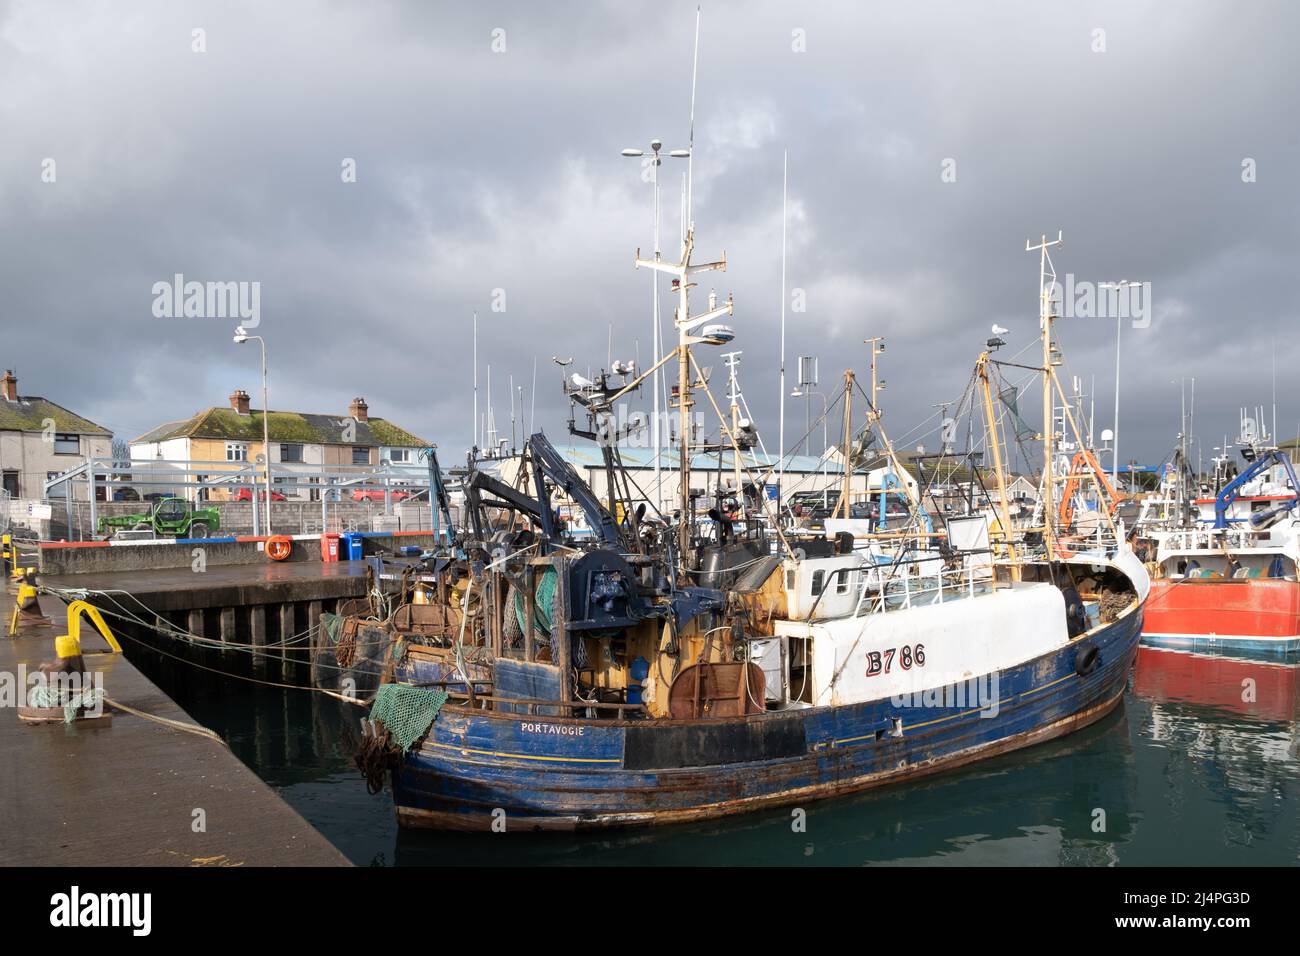 Blue and white fishing boat at Portavogie Harbour in Co. Down, Northern Ireland. Stock Photo